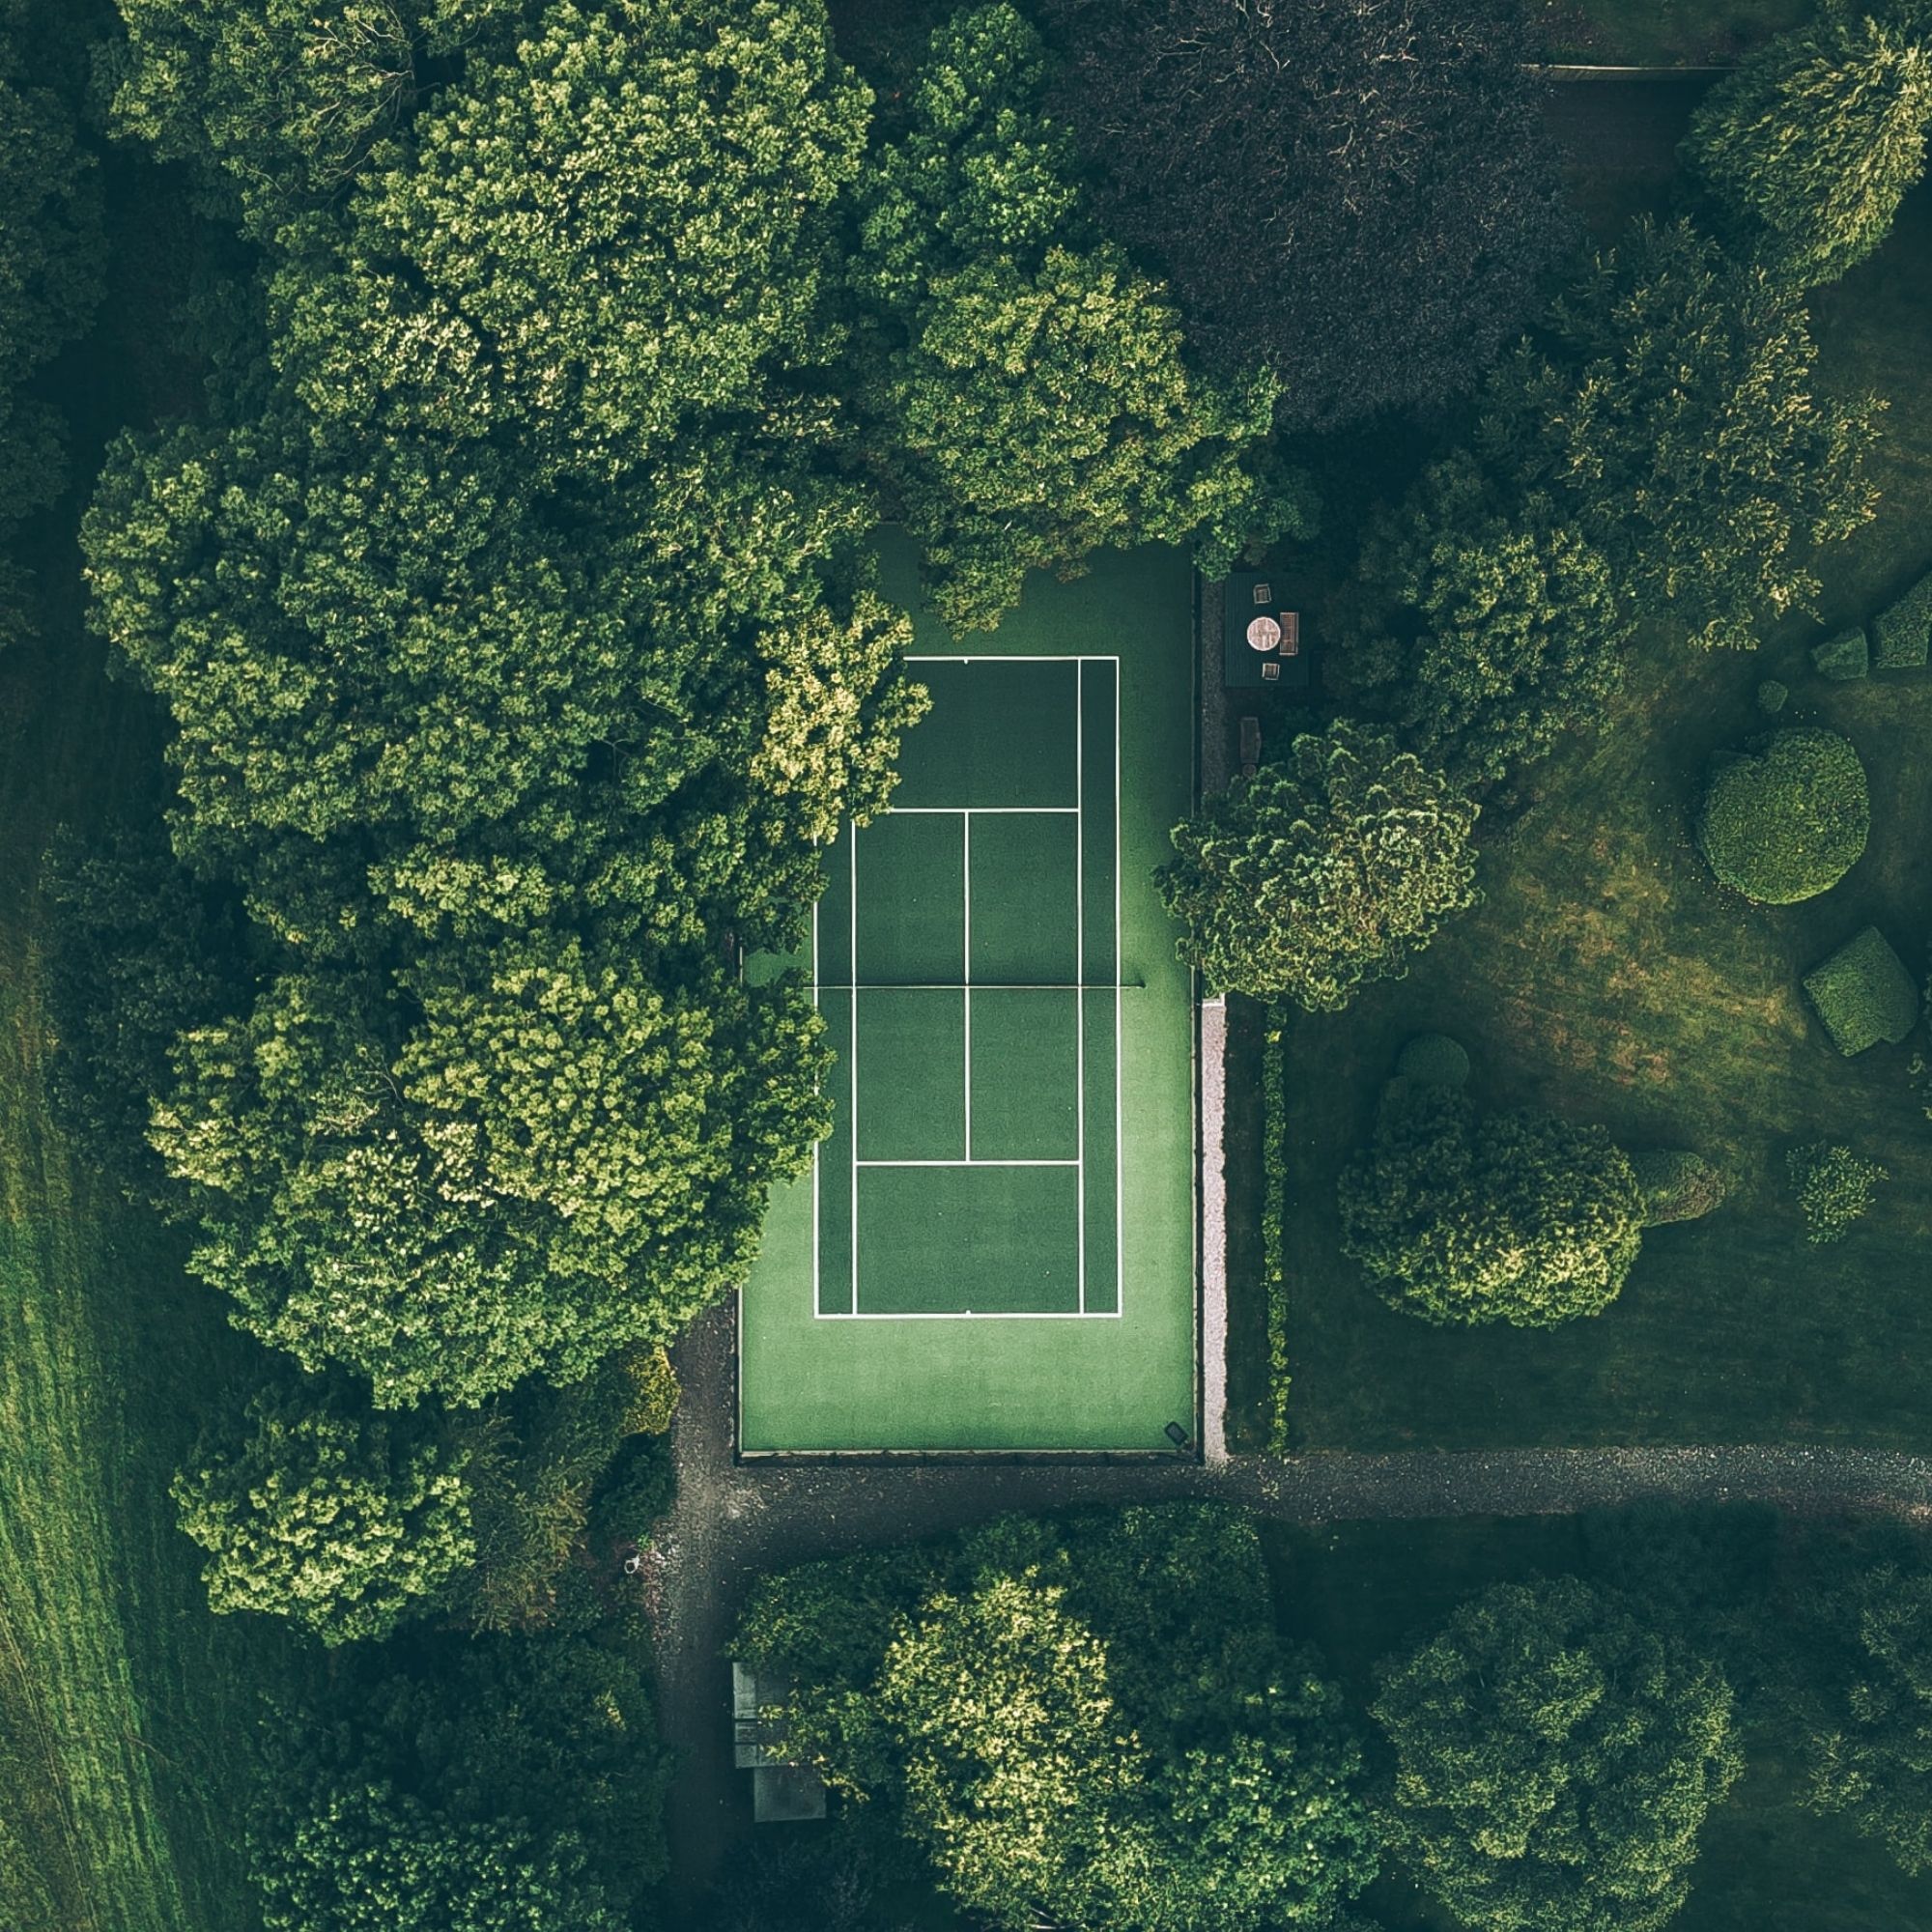 Play tennis more sustainably